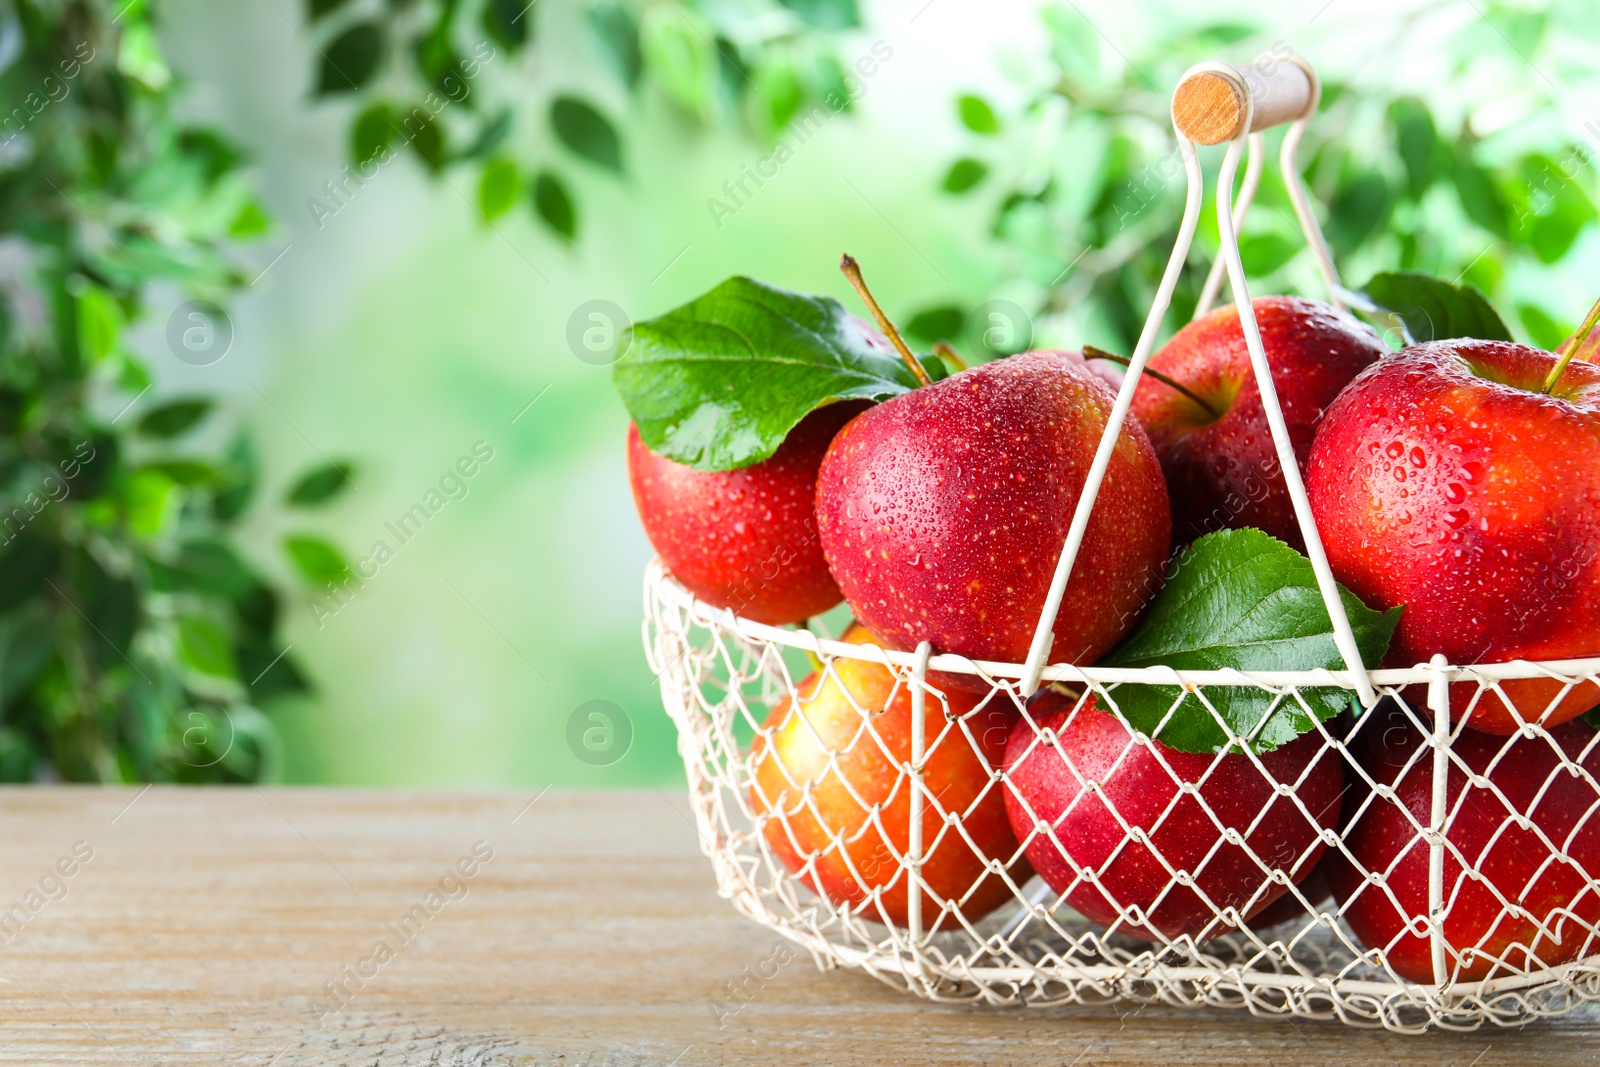 Photo of Ripe red apples in metal basket on wooden table against blurred background. Space for text